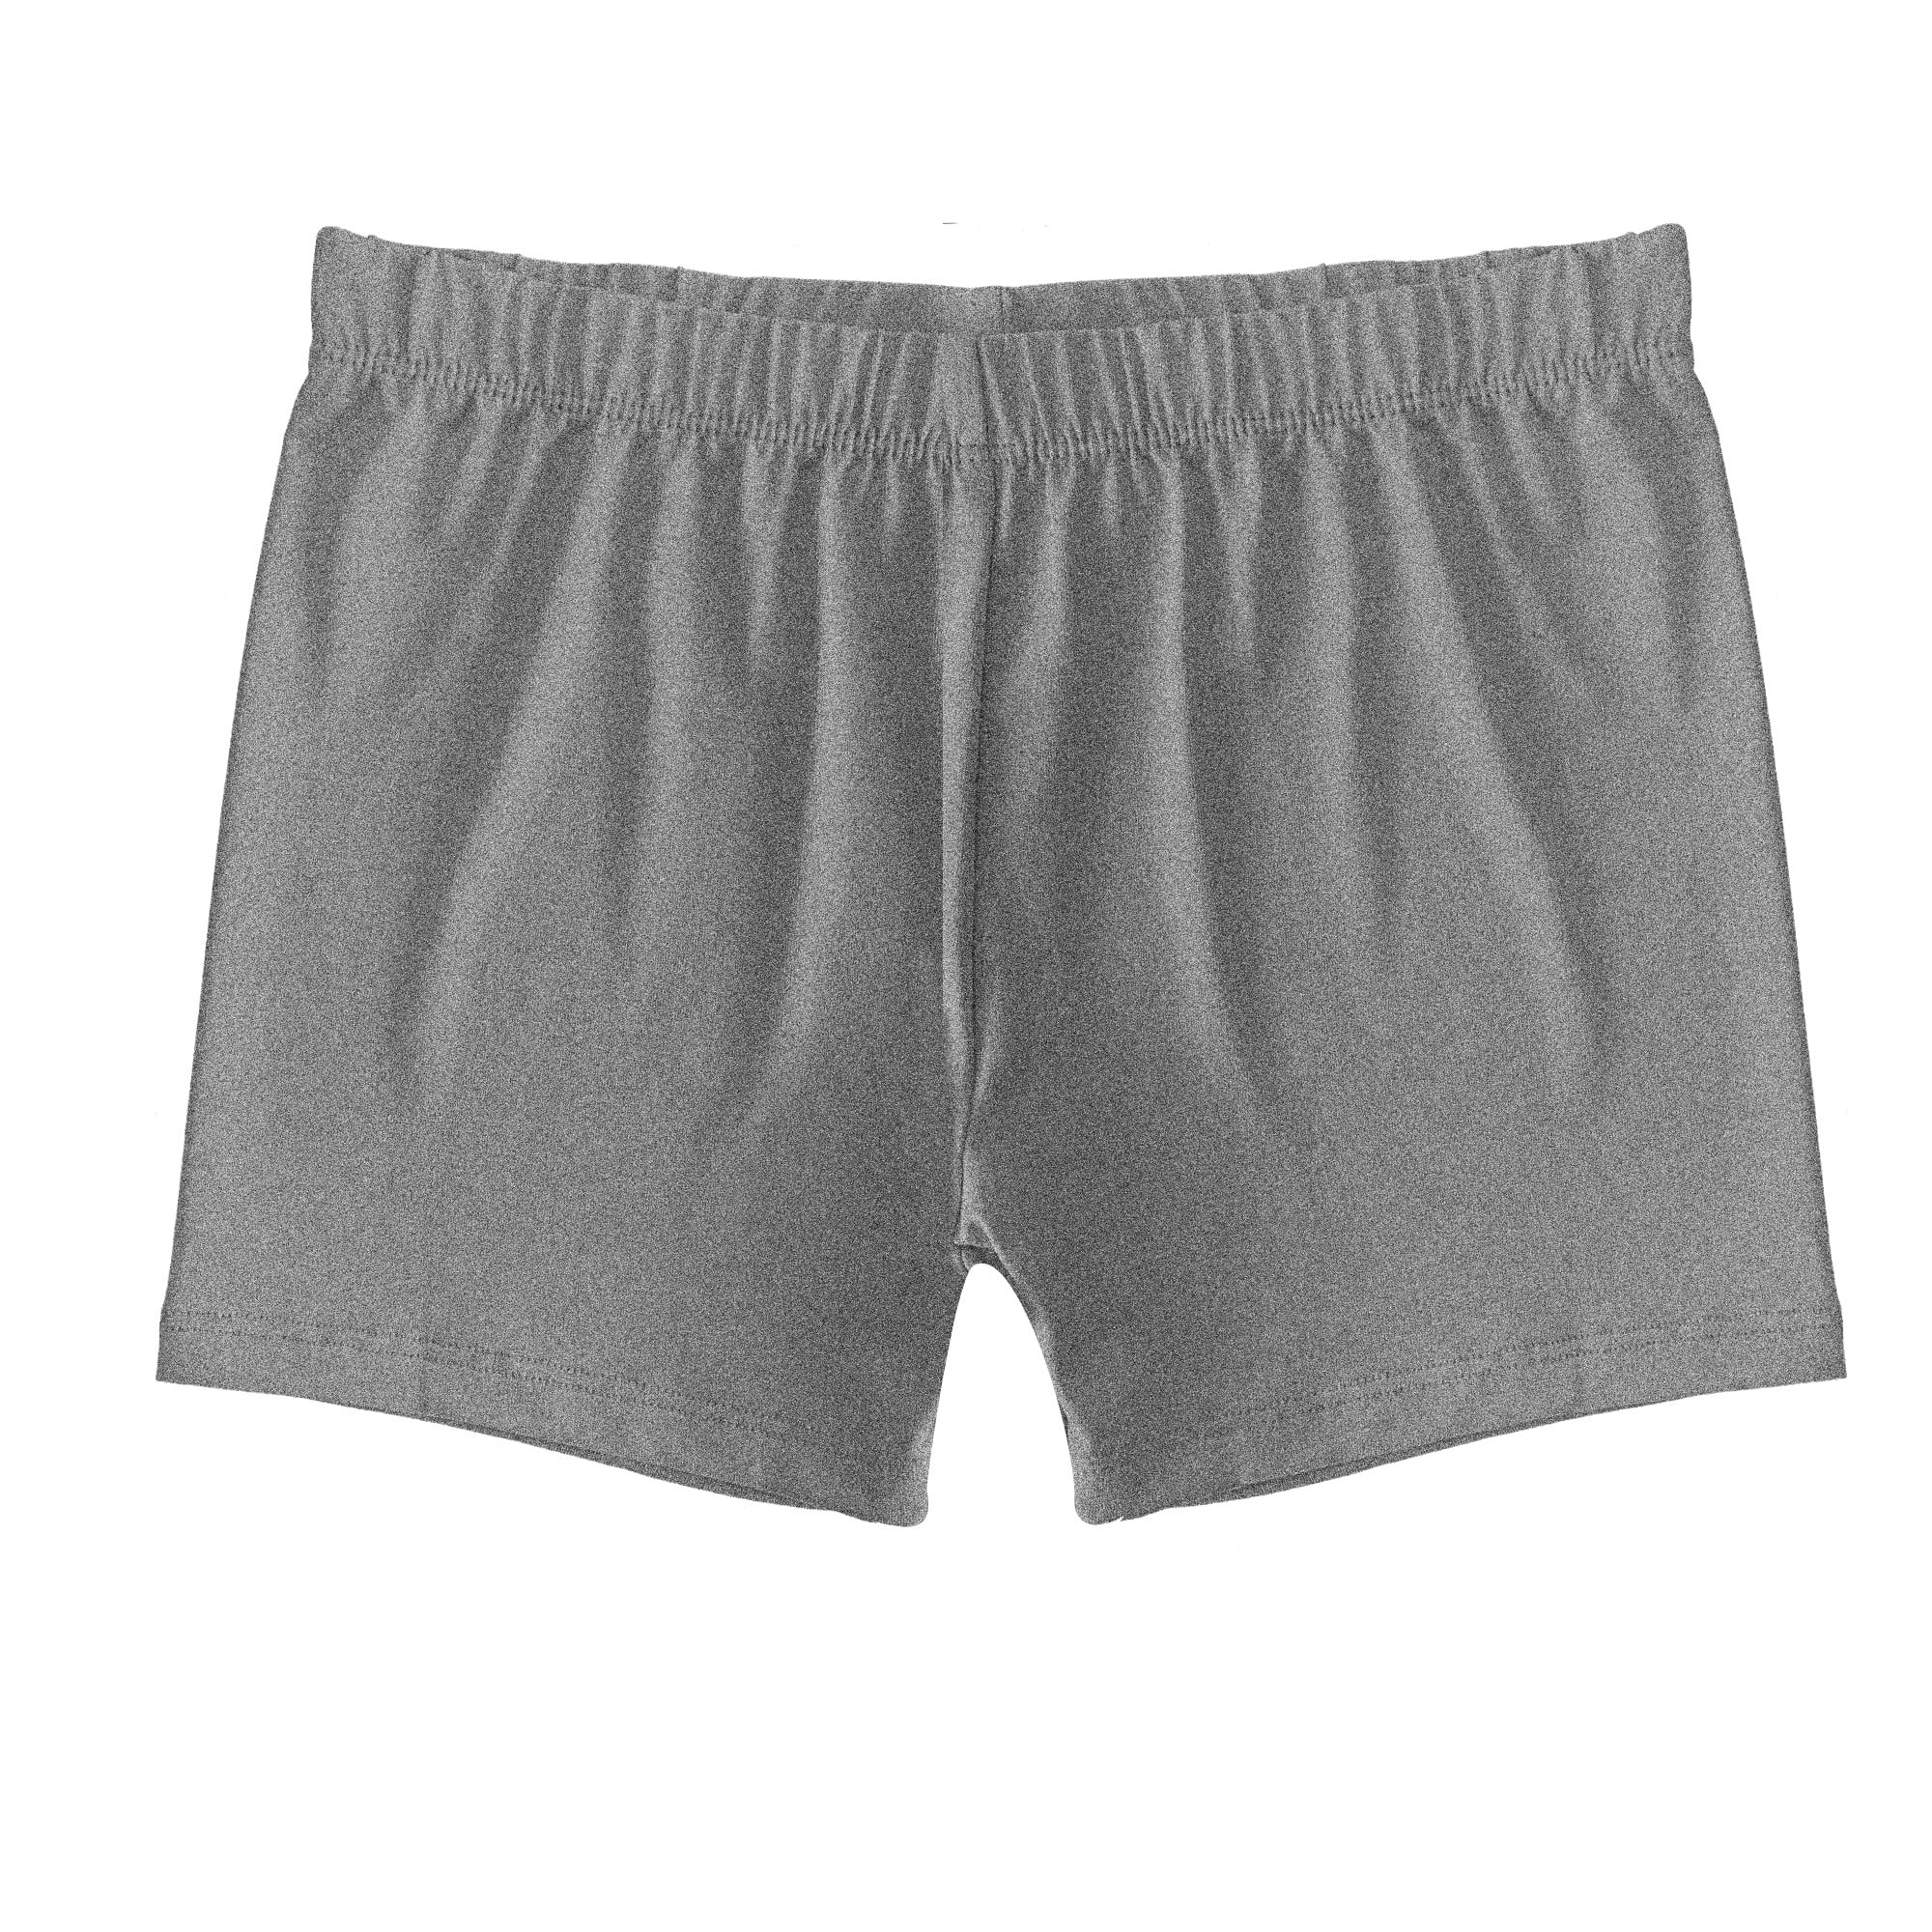 playground shorts for under dresses